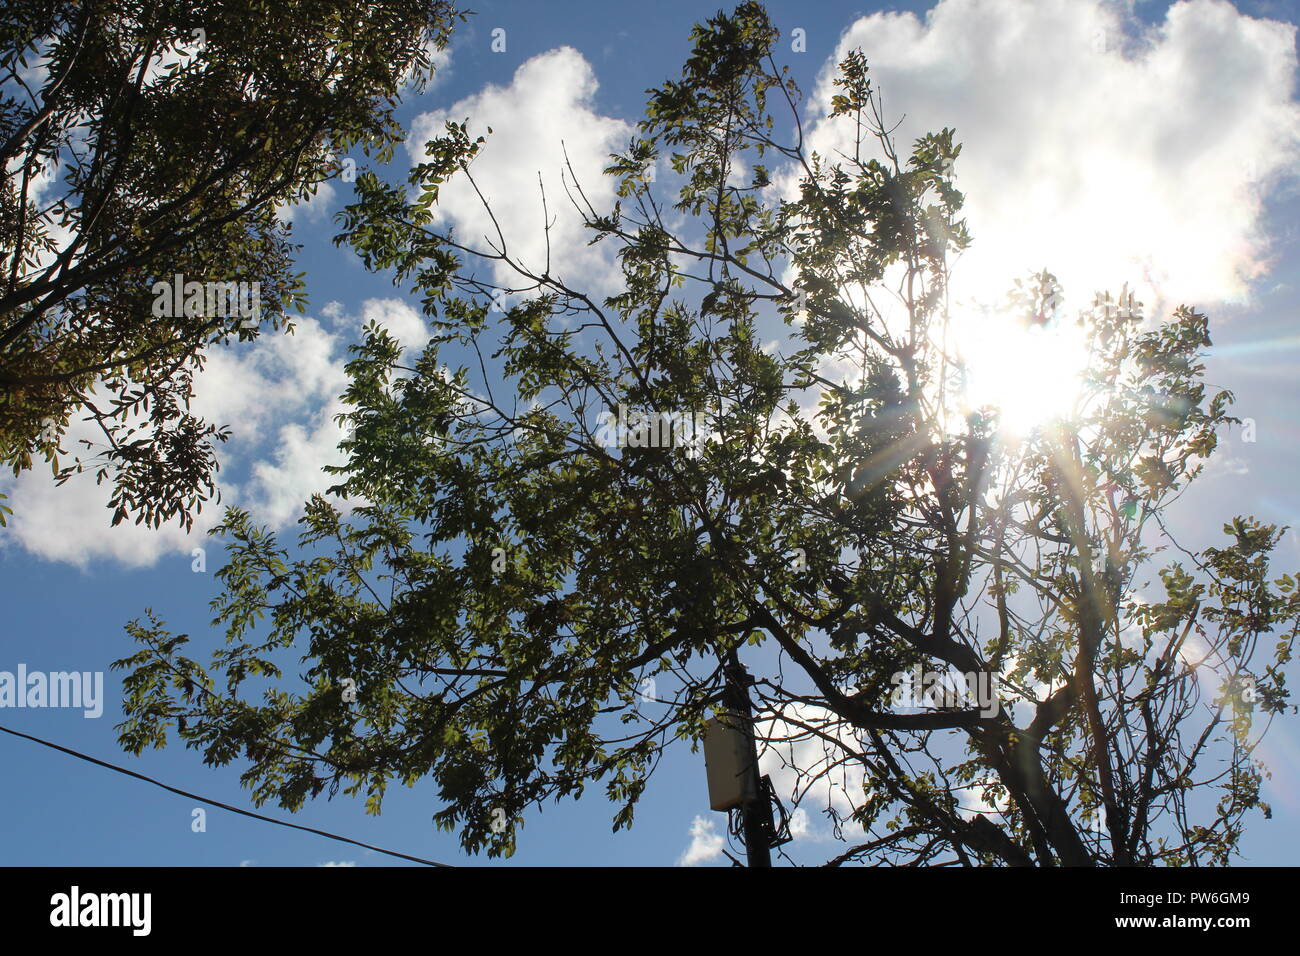 Sun shining through the tree tops with clouds in a blue sky - example of sunny weather or summer weather Stock Photo